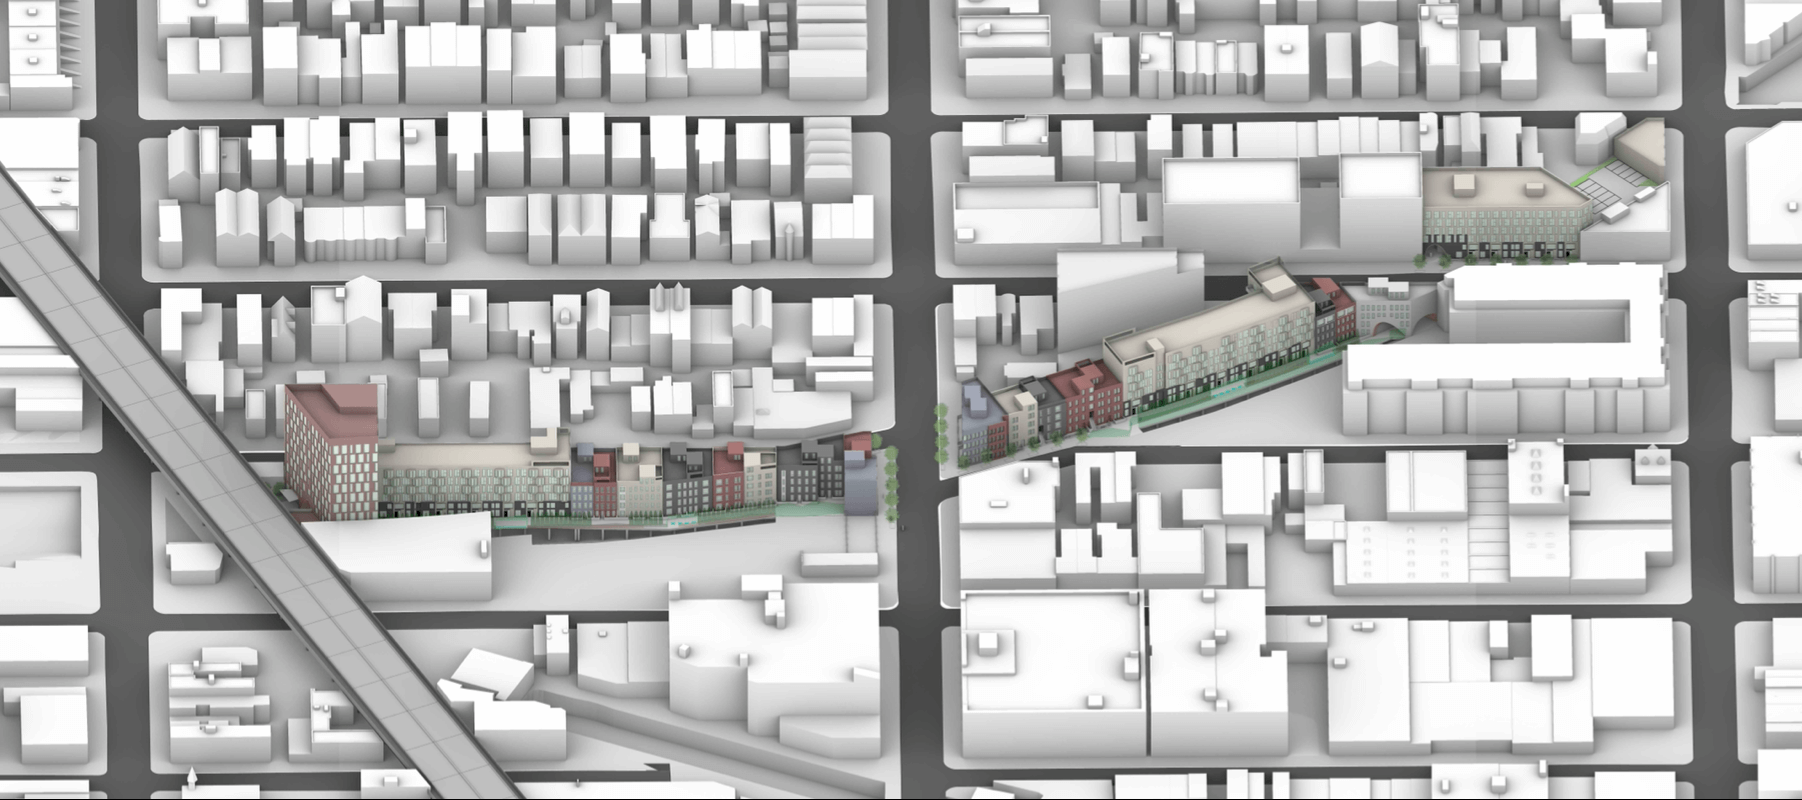 rendering showing an aerial view of the planned buildings and the surrounding blocks